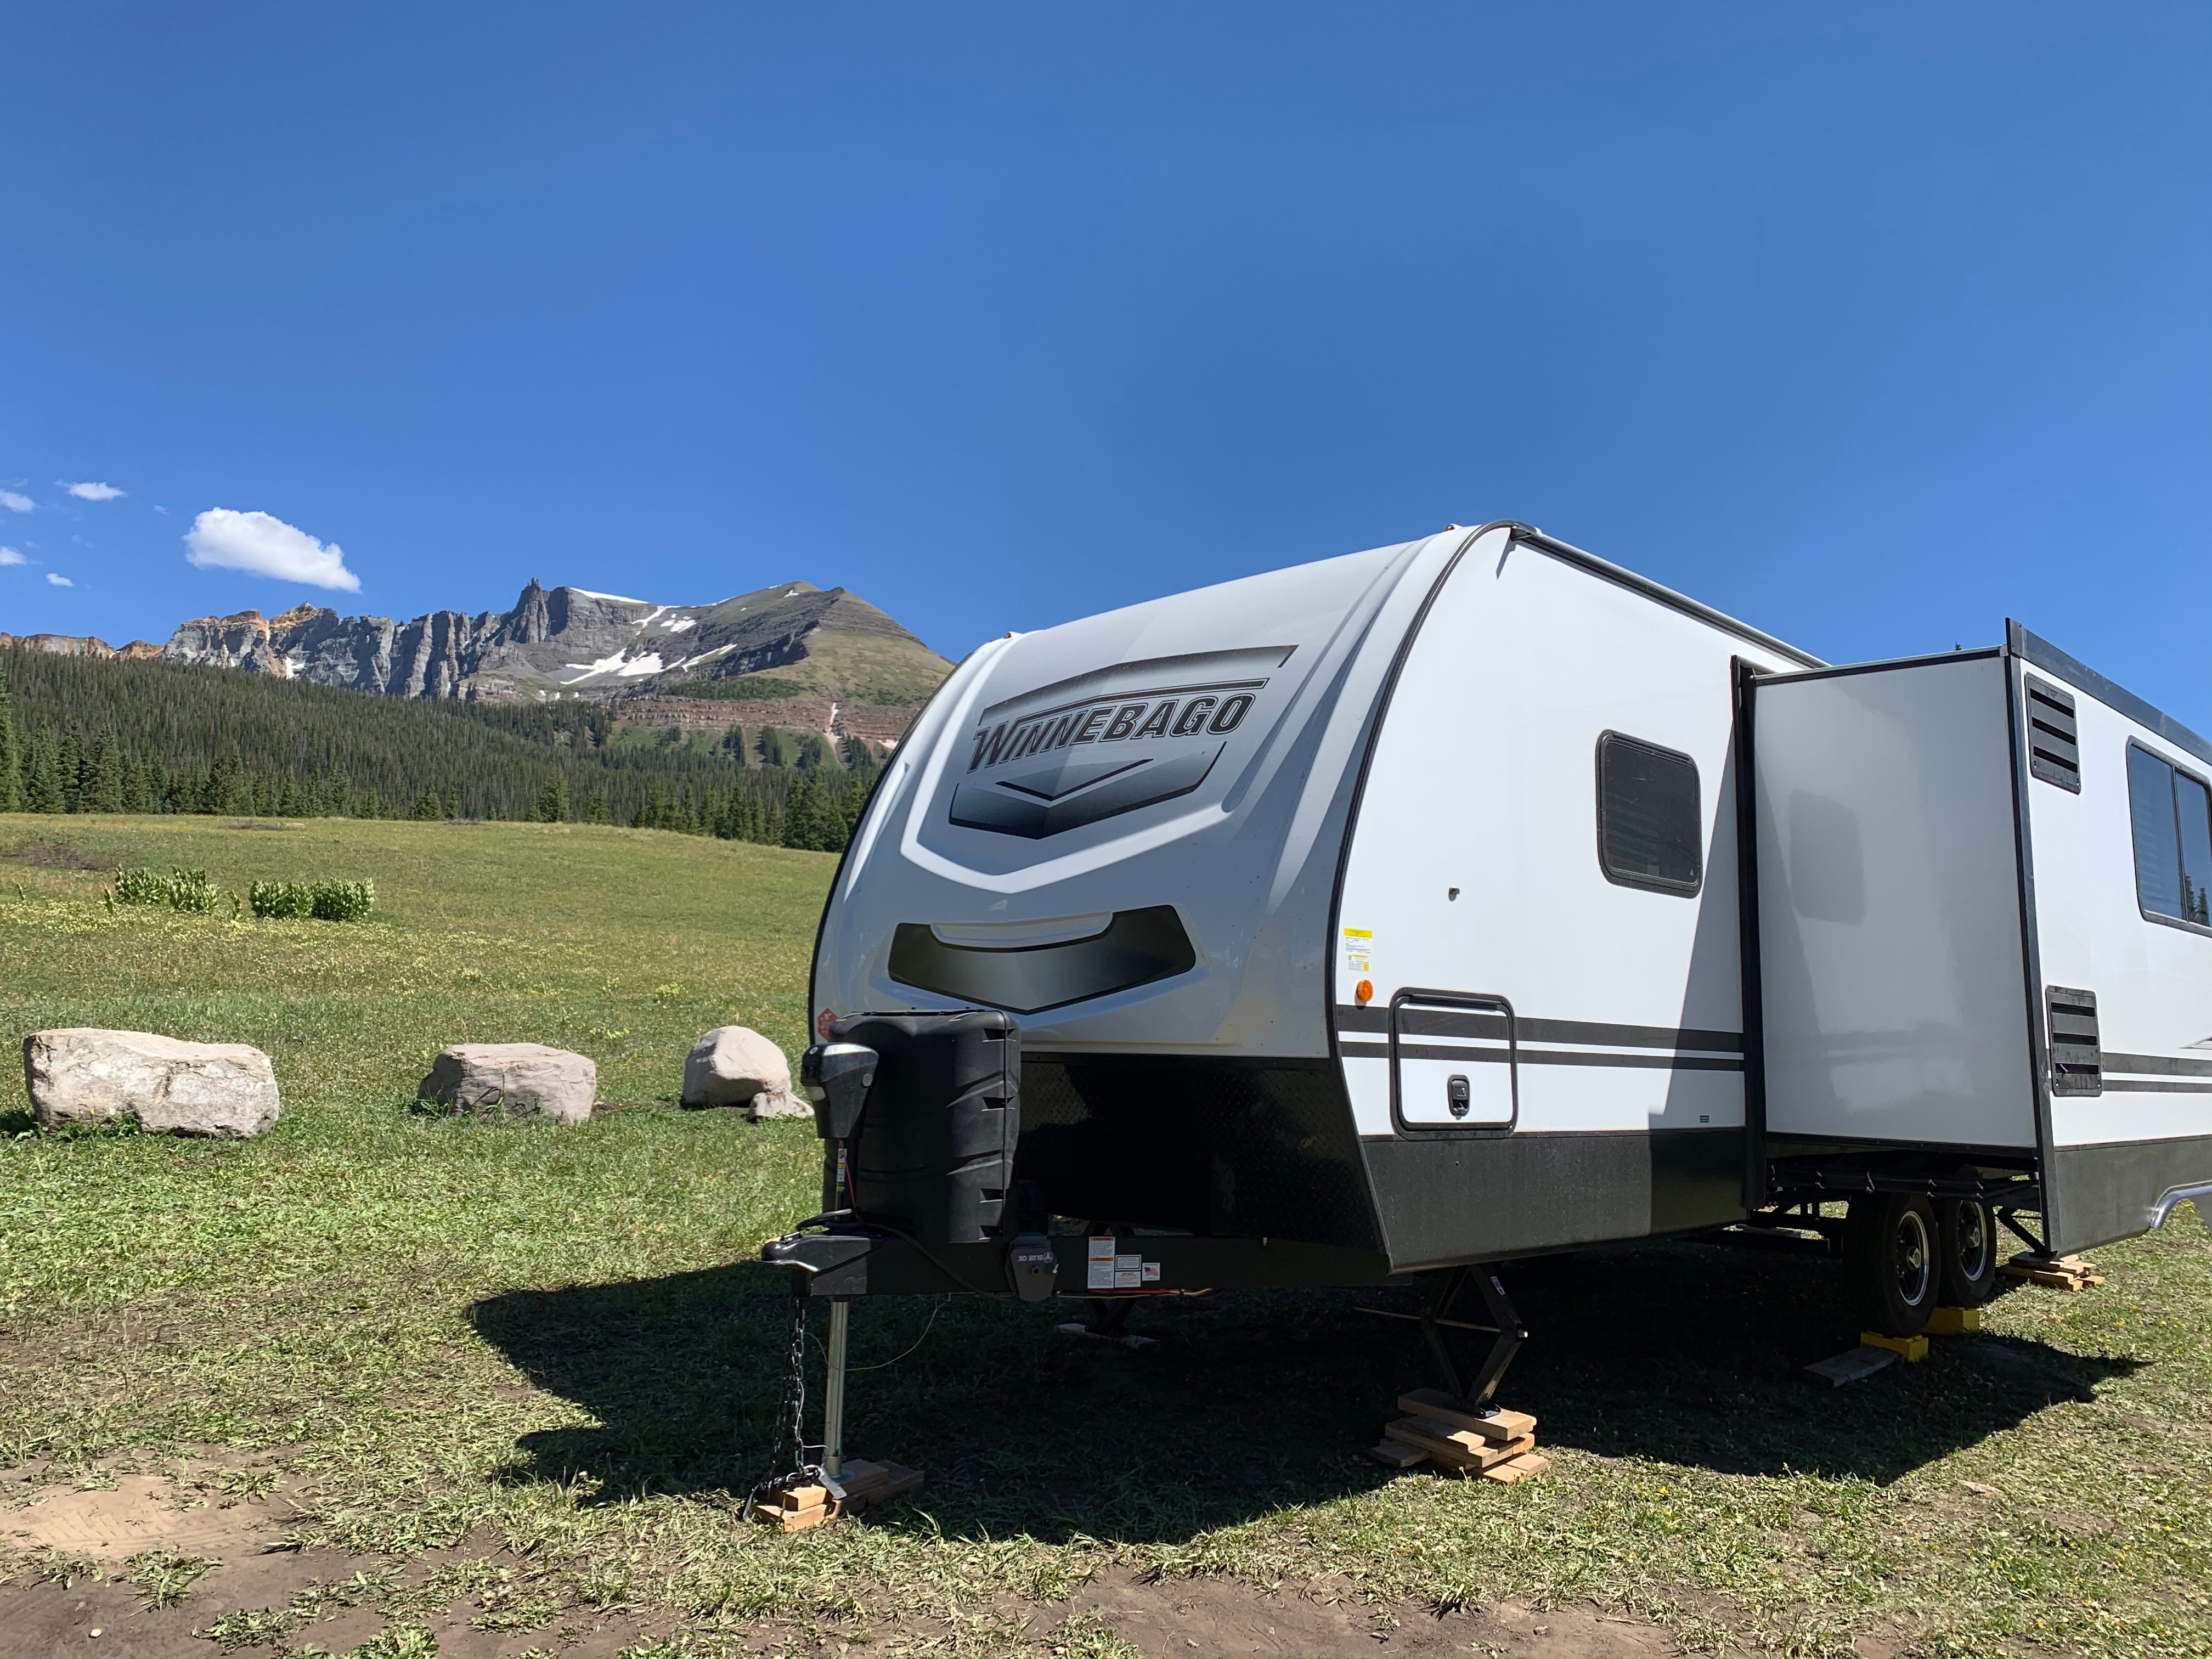 Camper submitted image from Lizard Head Pass Dispersed Camping - 5